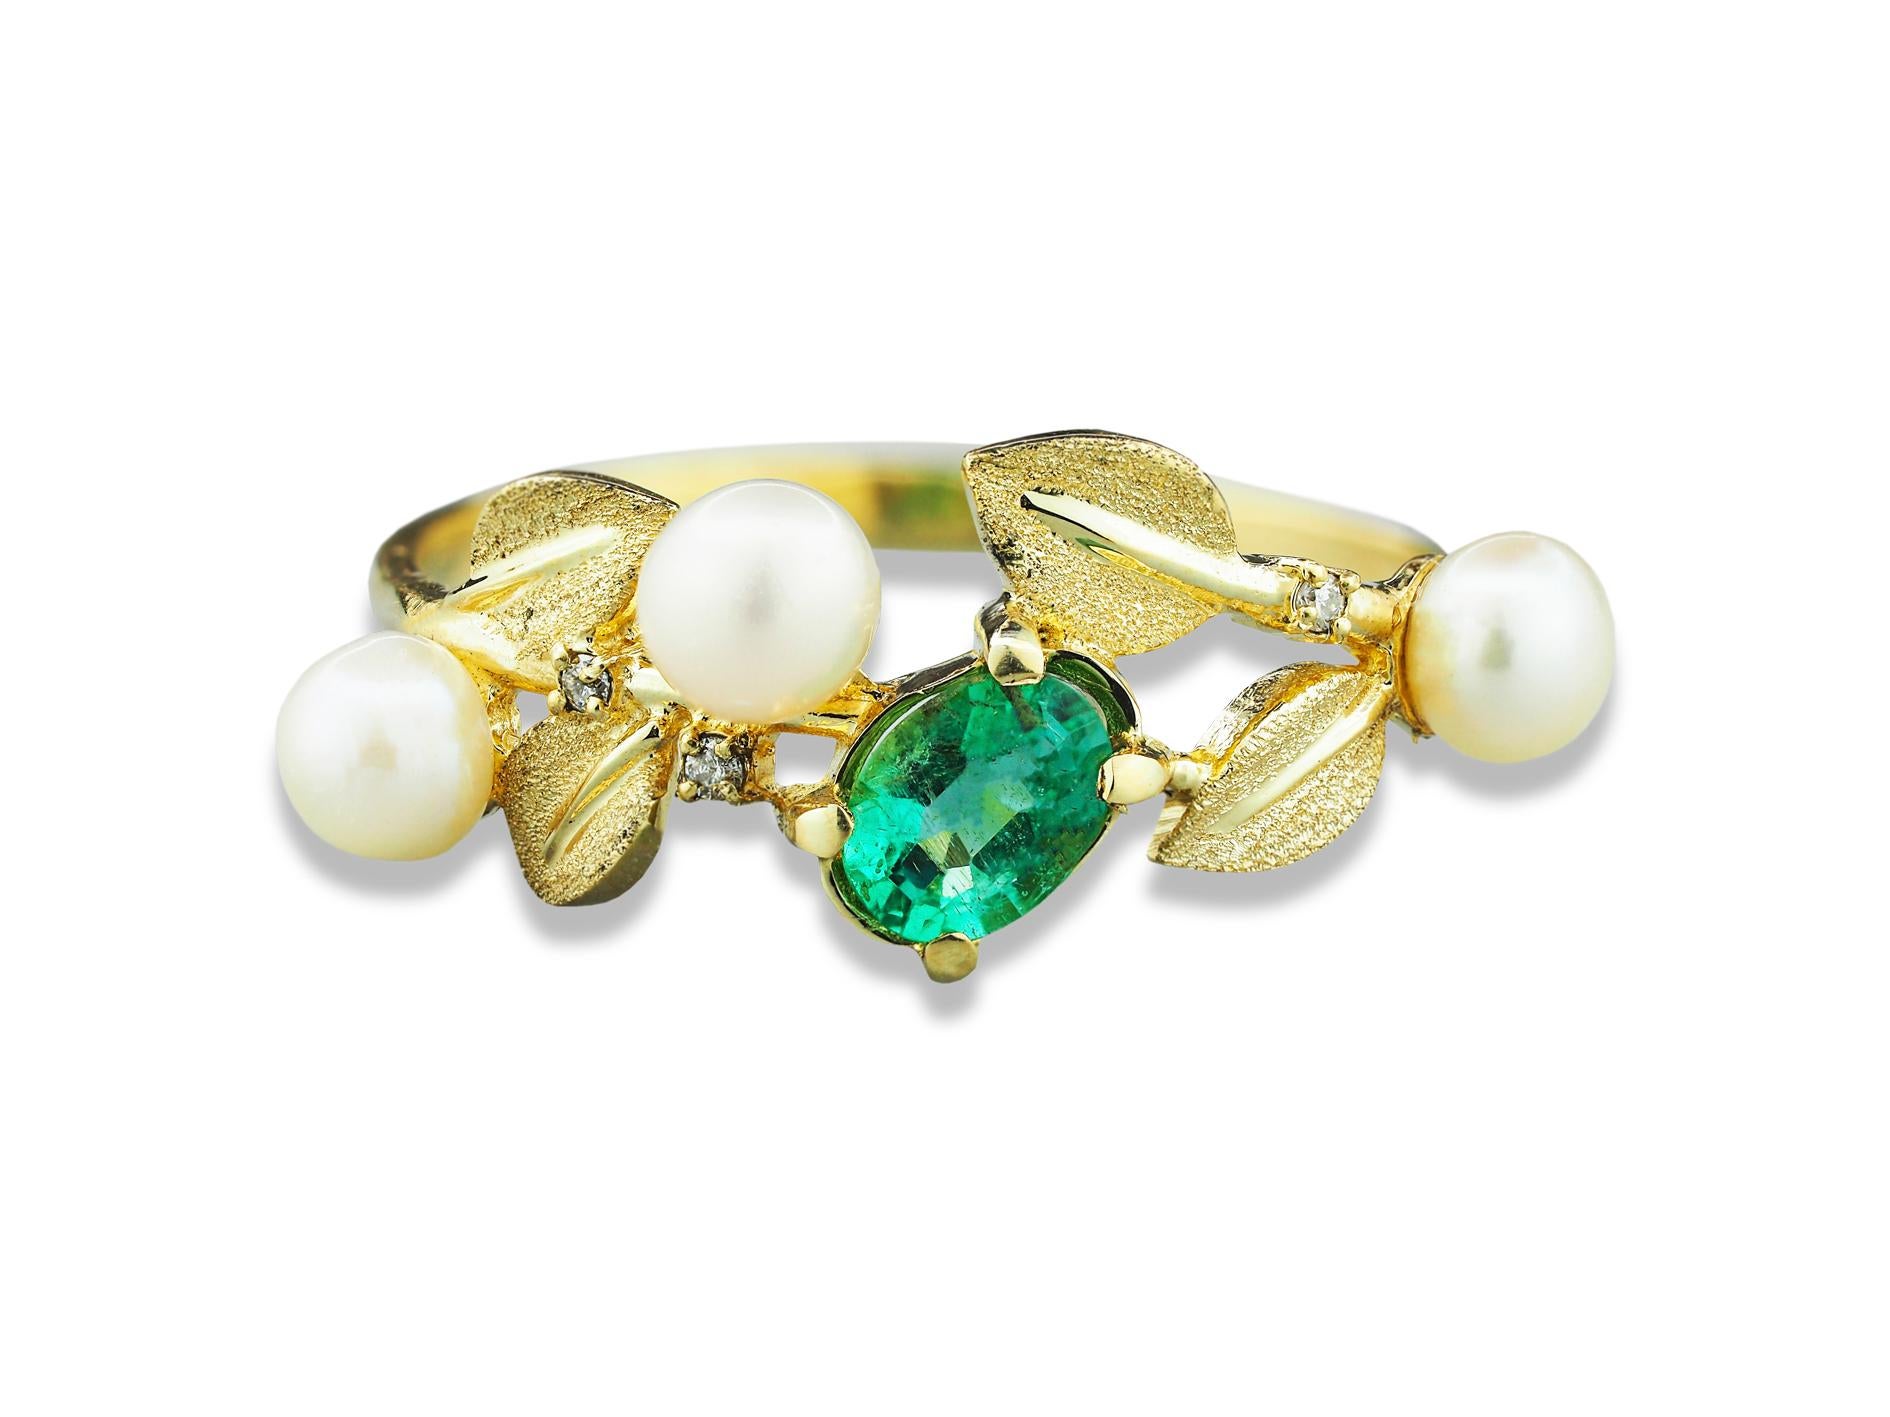 14k Gold Ring with Emerald, Pearls and Diamonds 7